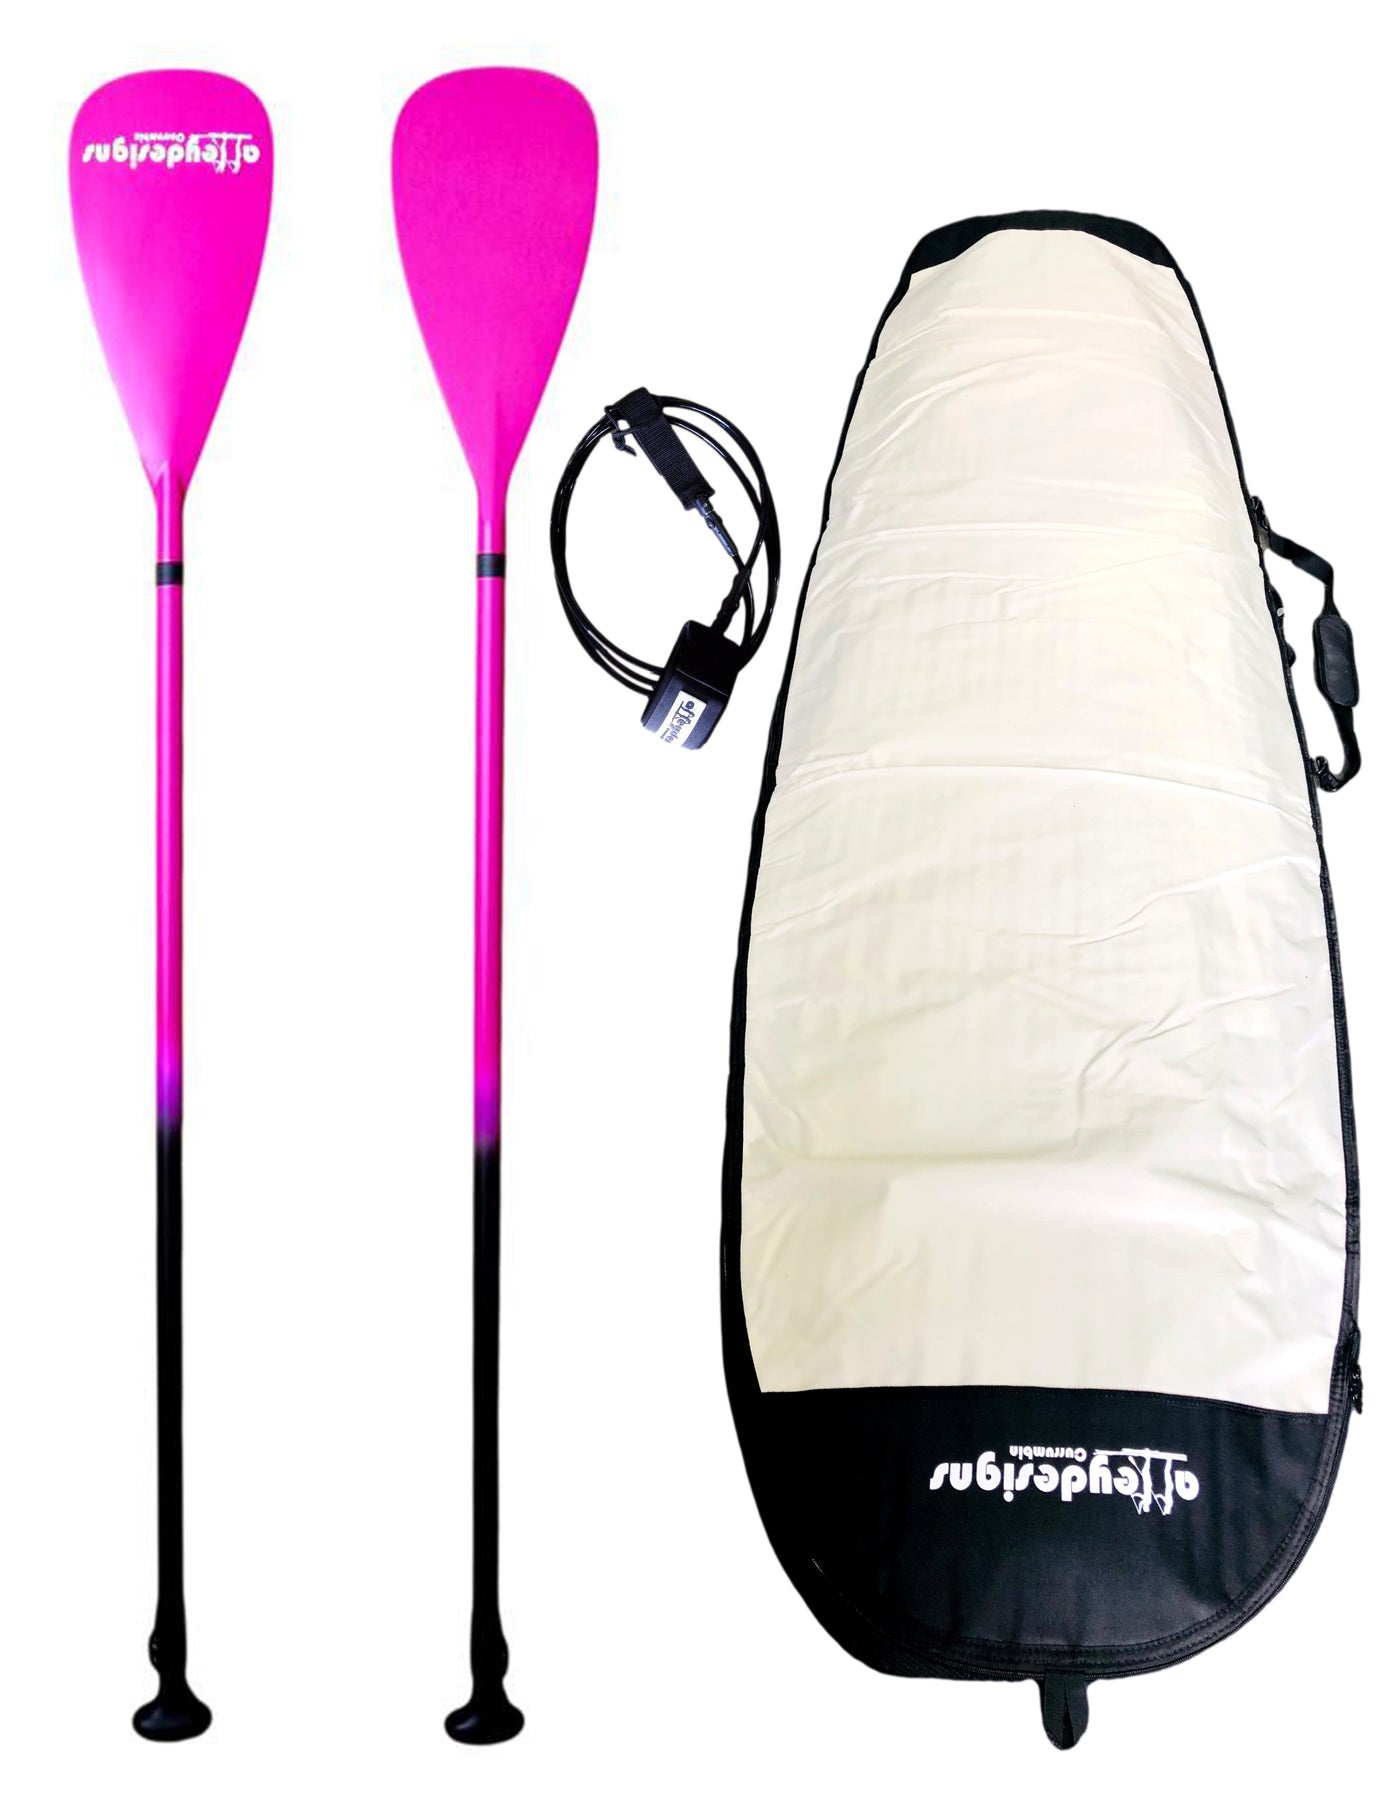 $350 SUP PADDLE COLOURED CARBON/FIBREGLASS ADJUSTABLE PADDLE & BOARD BAG  & LEG ROPE PACKAGE - Alleydesigns  Pty Ltd                                             ABN: 44165571264